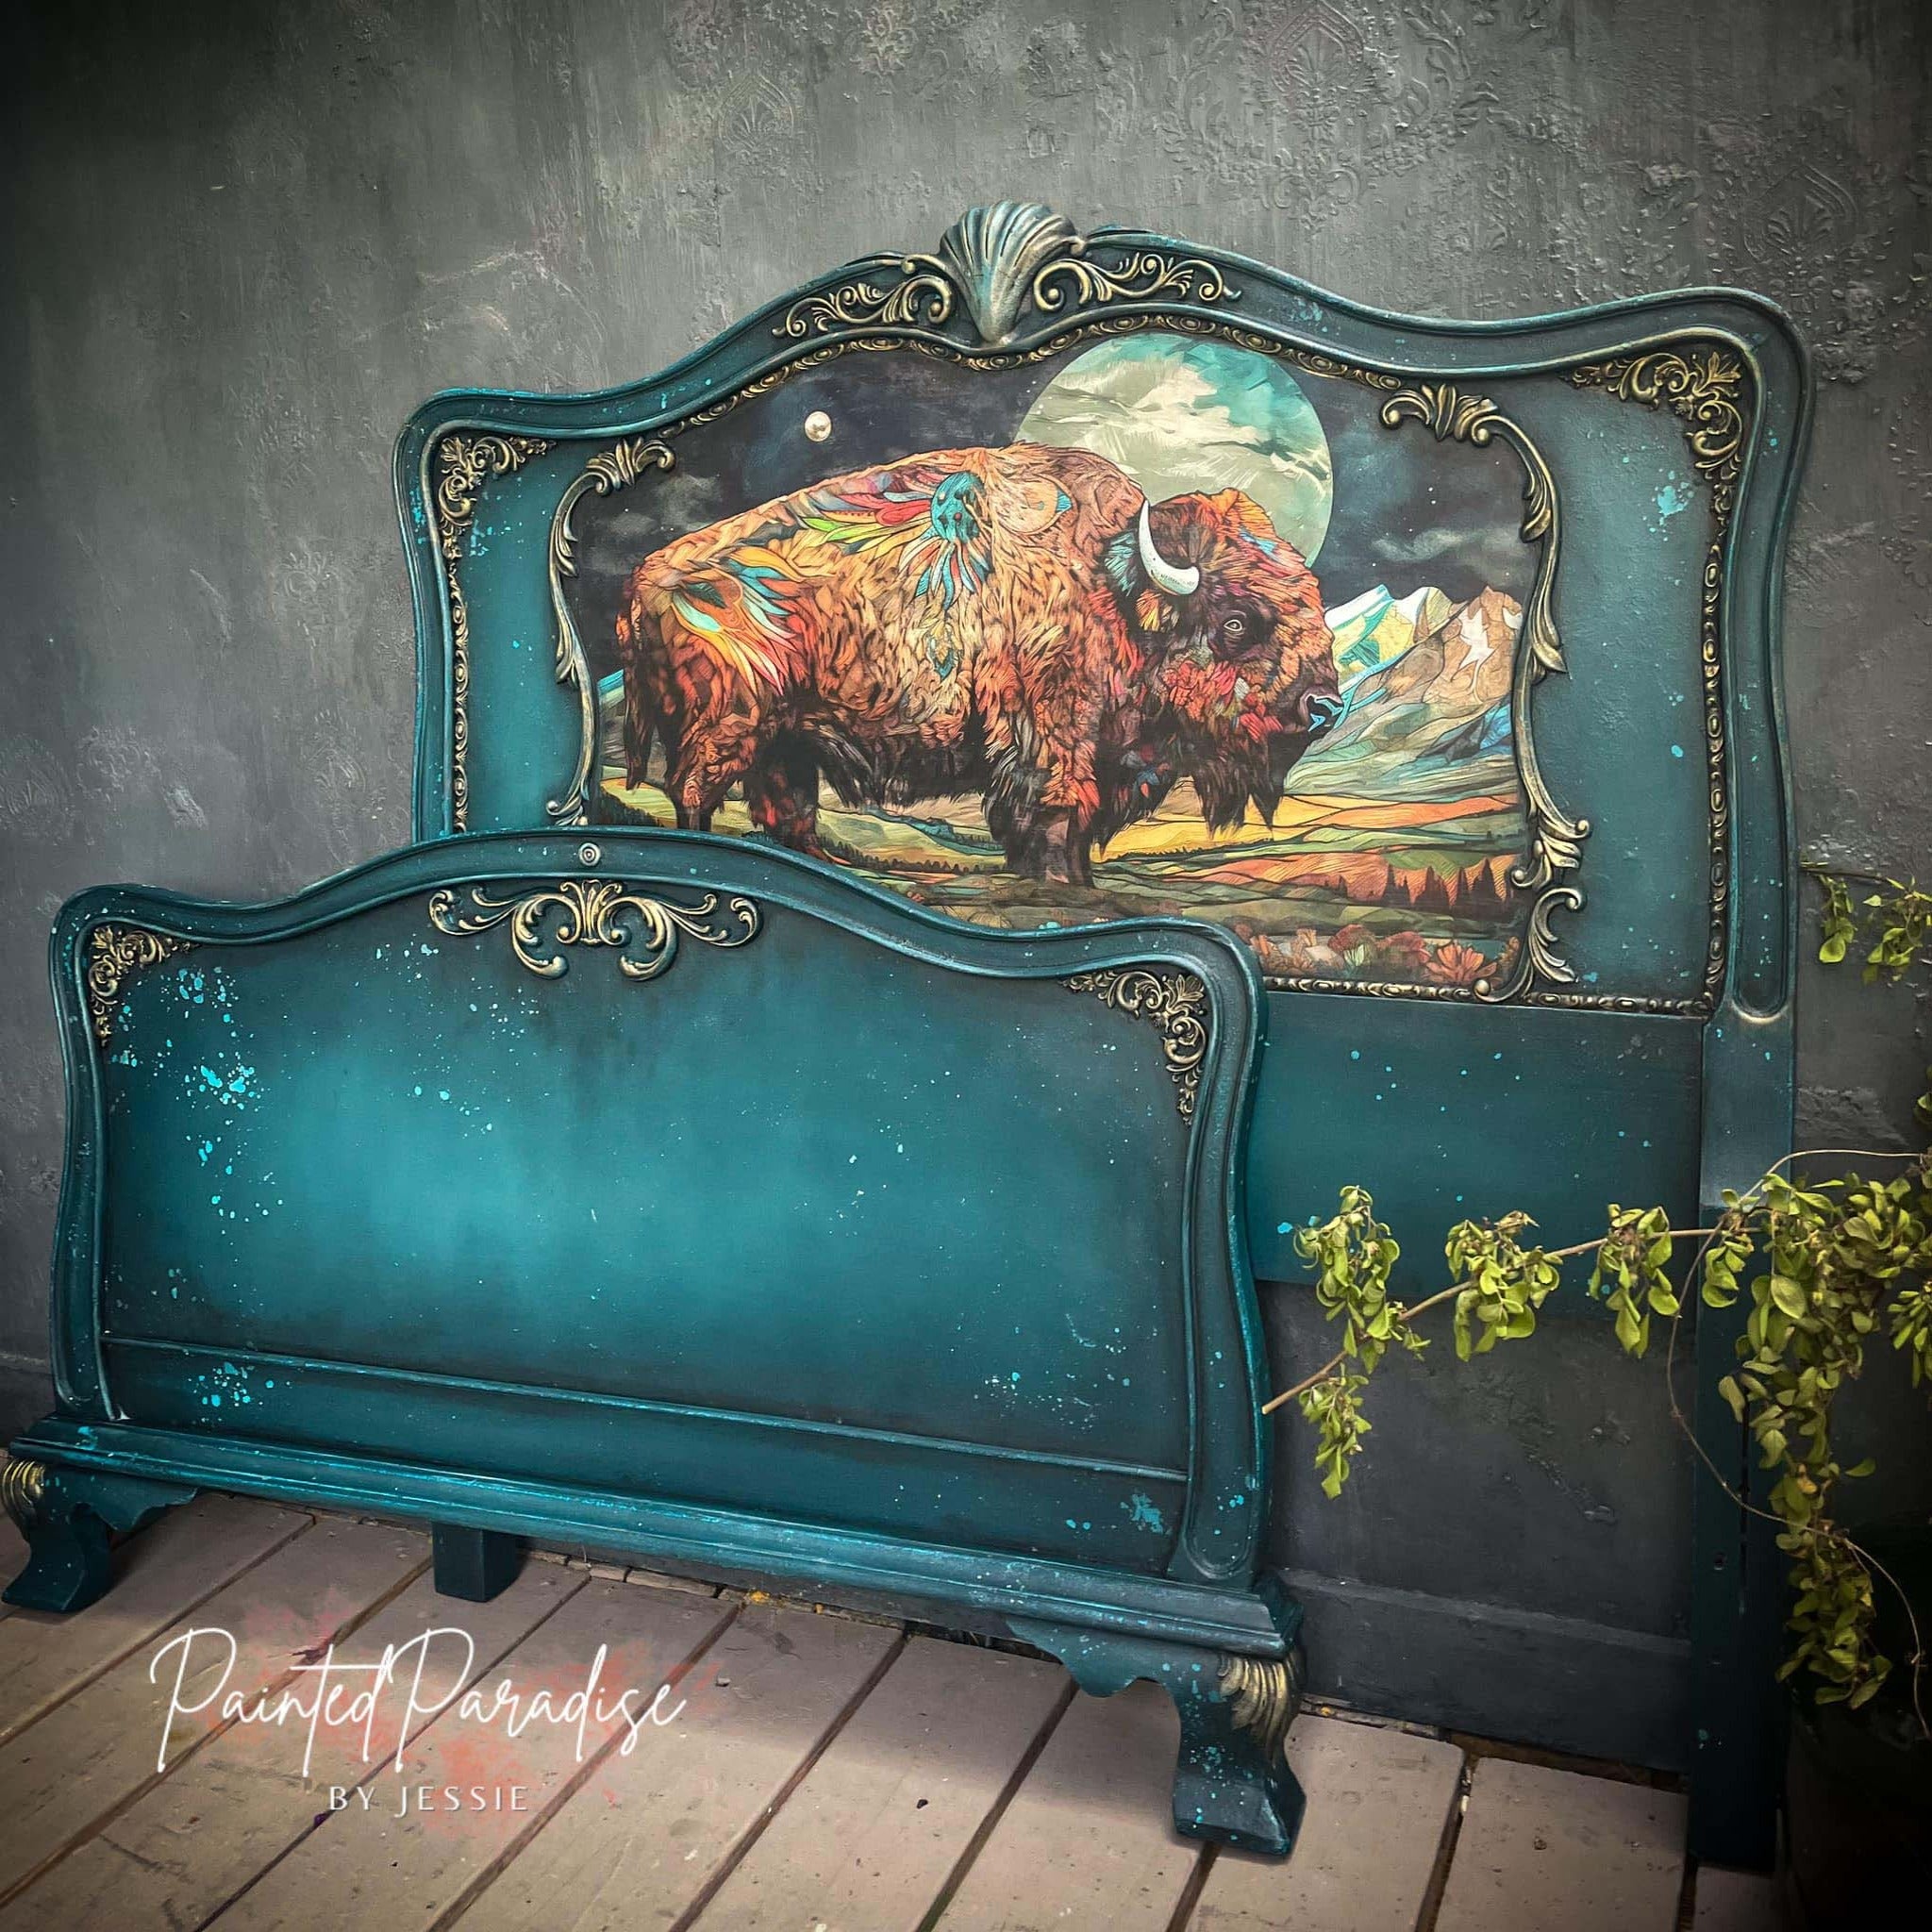 A vintage headboard set refurbished by Painted Paradise by Jessie is painted dark teal with gold accents and features Whimsykel's Dream Keeper tissue paper on the headboard.